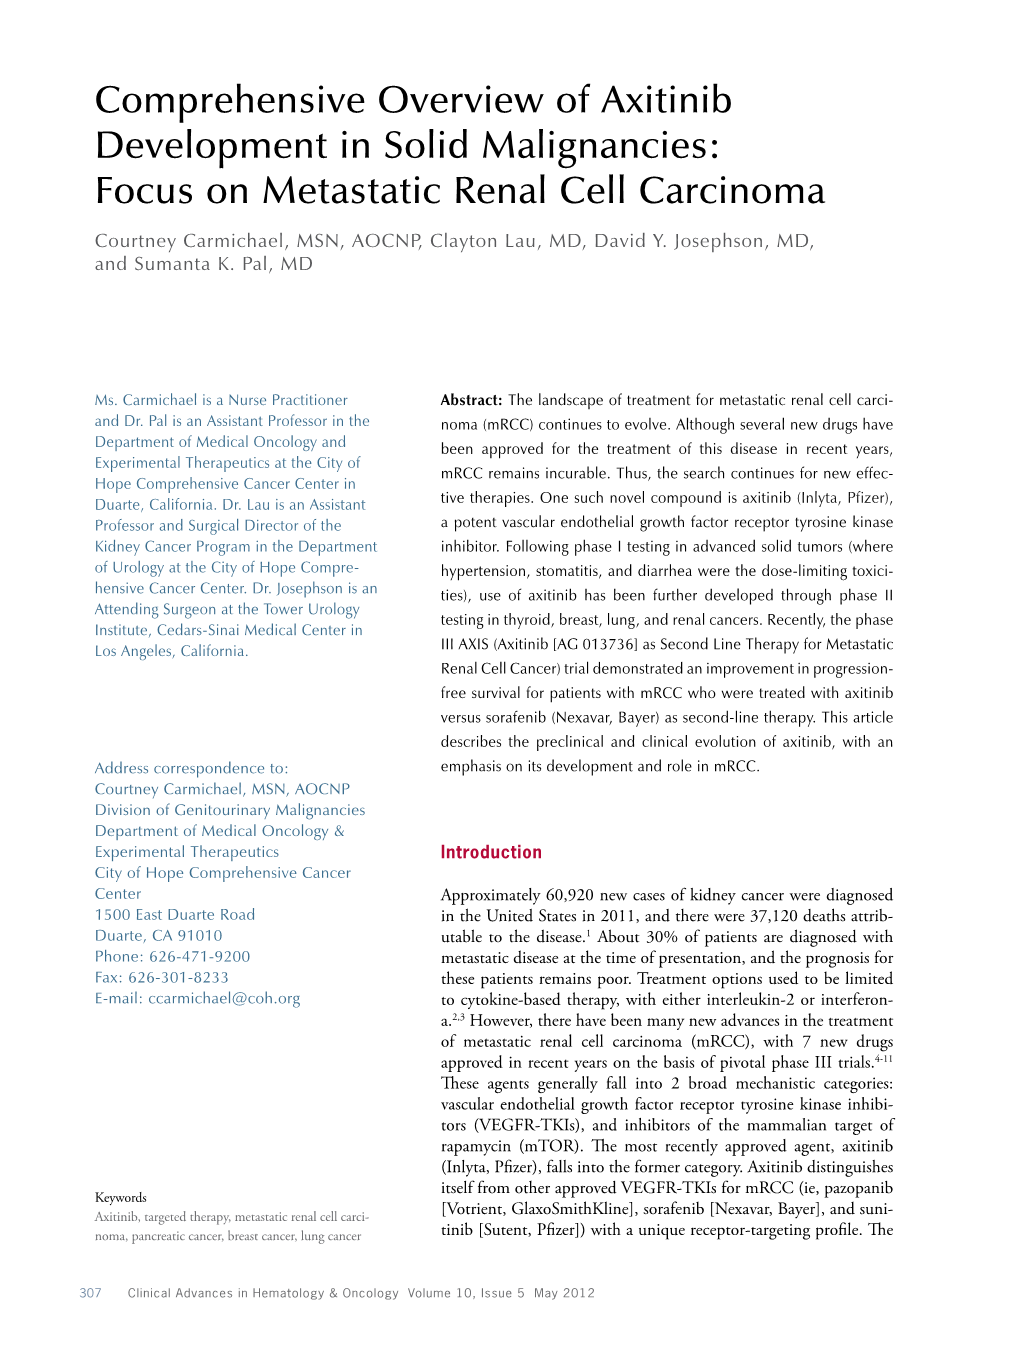 Focus on Metastatic Renal Cell Carcinoma